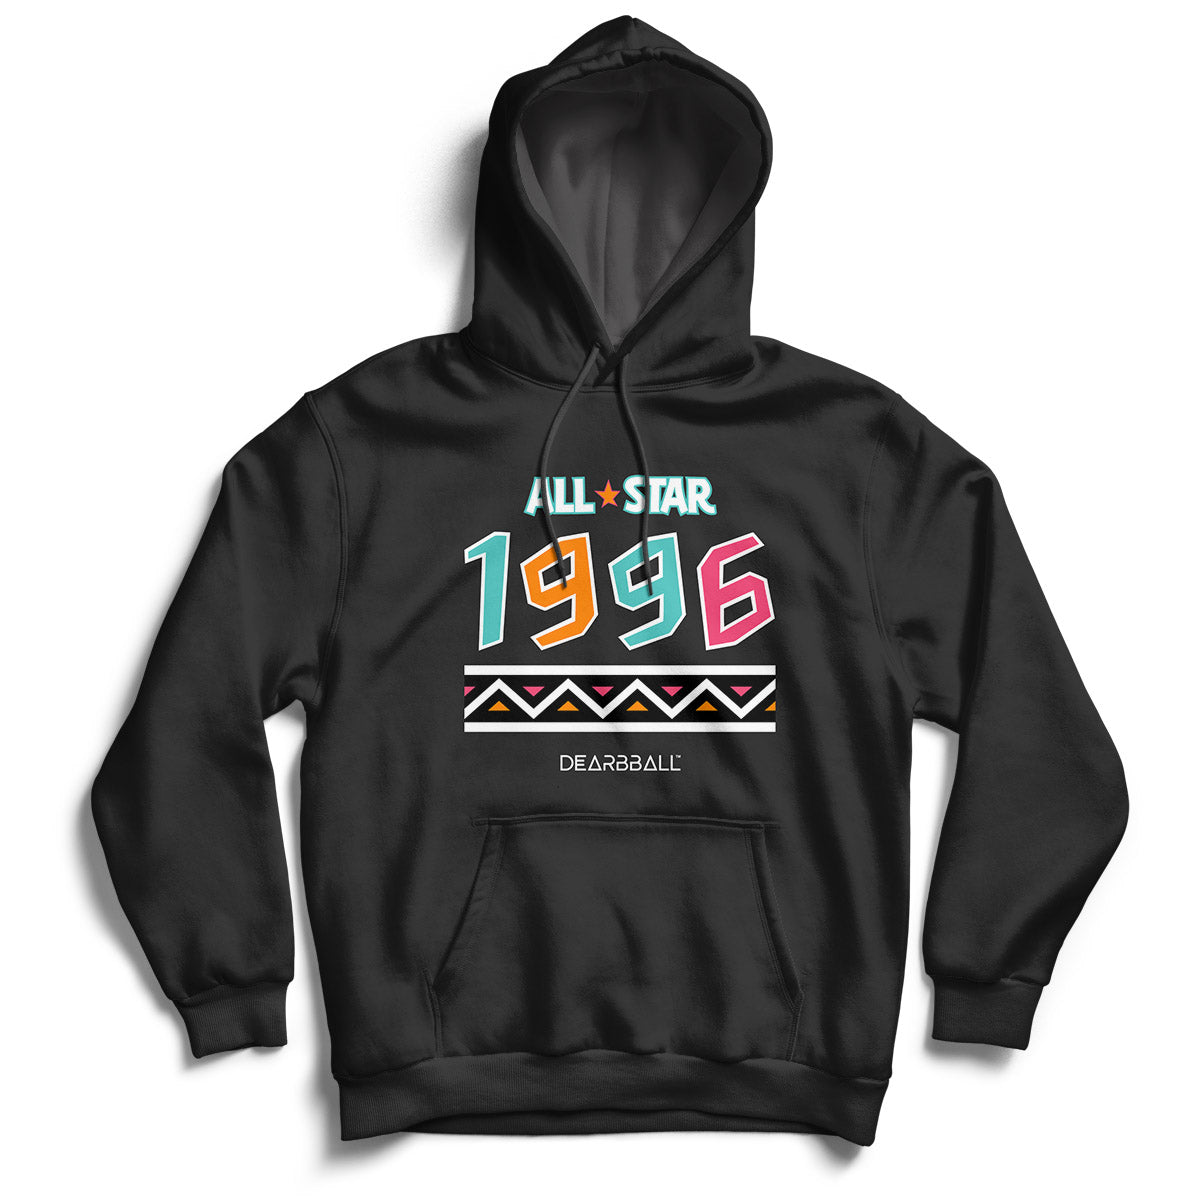 DearBBall Hoodie - ALL STAR 1996 Limited Edition